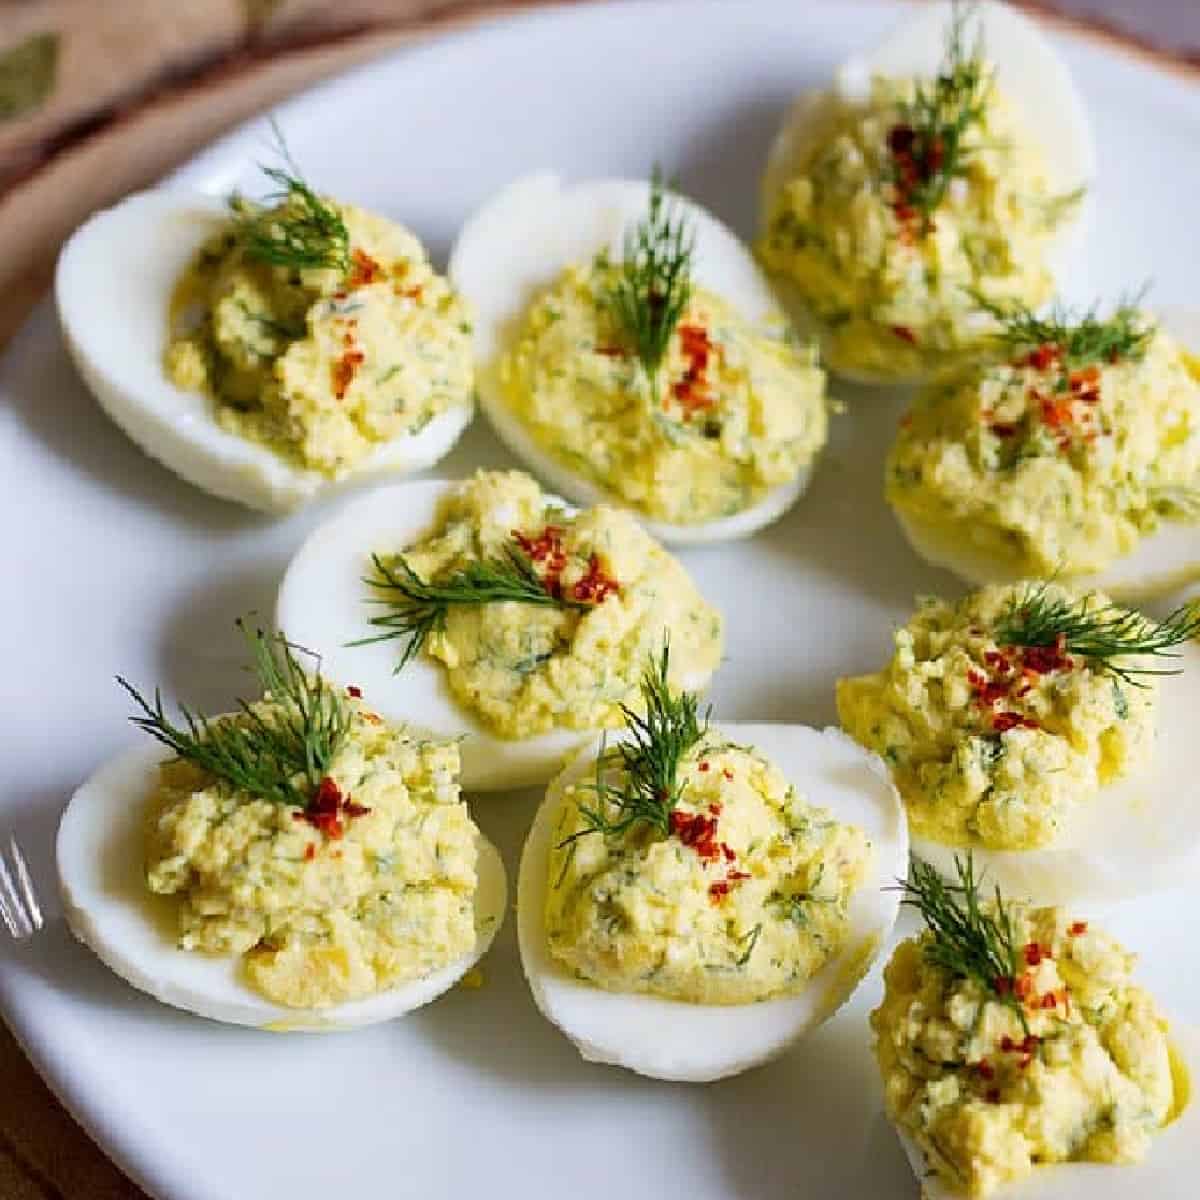 Mediterranean Deviled Eggs are the perfect twist on your favorite appetizer. The herbs and spices in this recipe make a refreshing dish that's quick and tasty!
